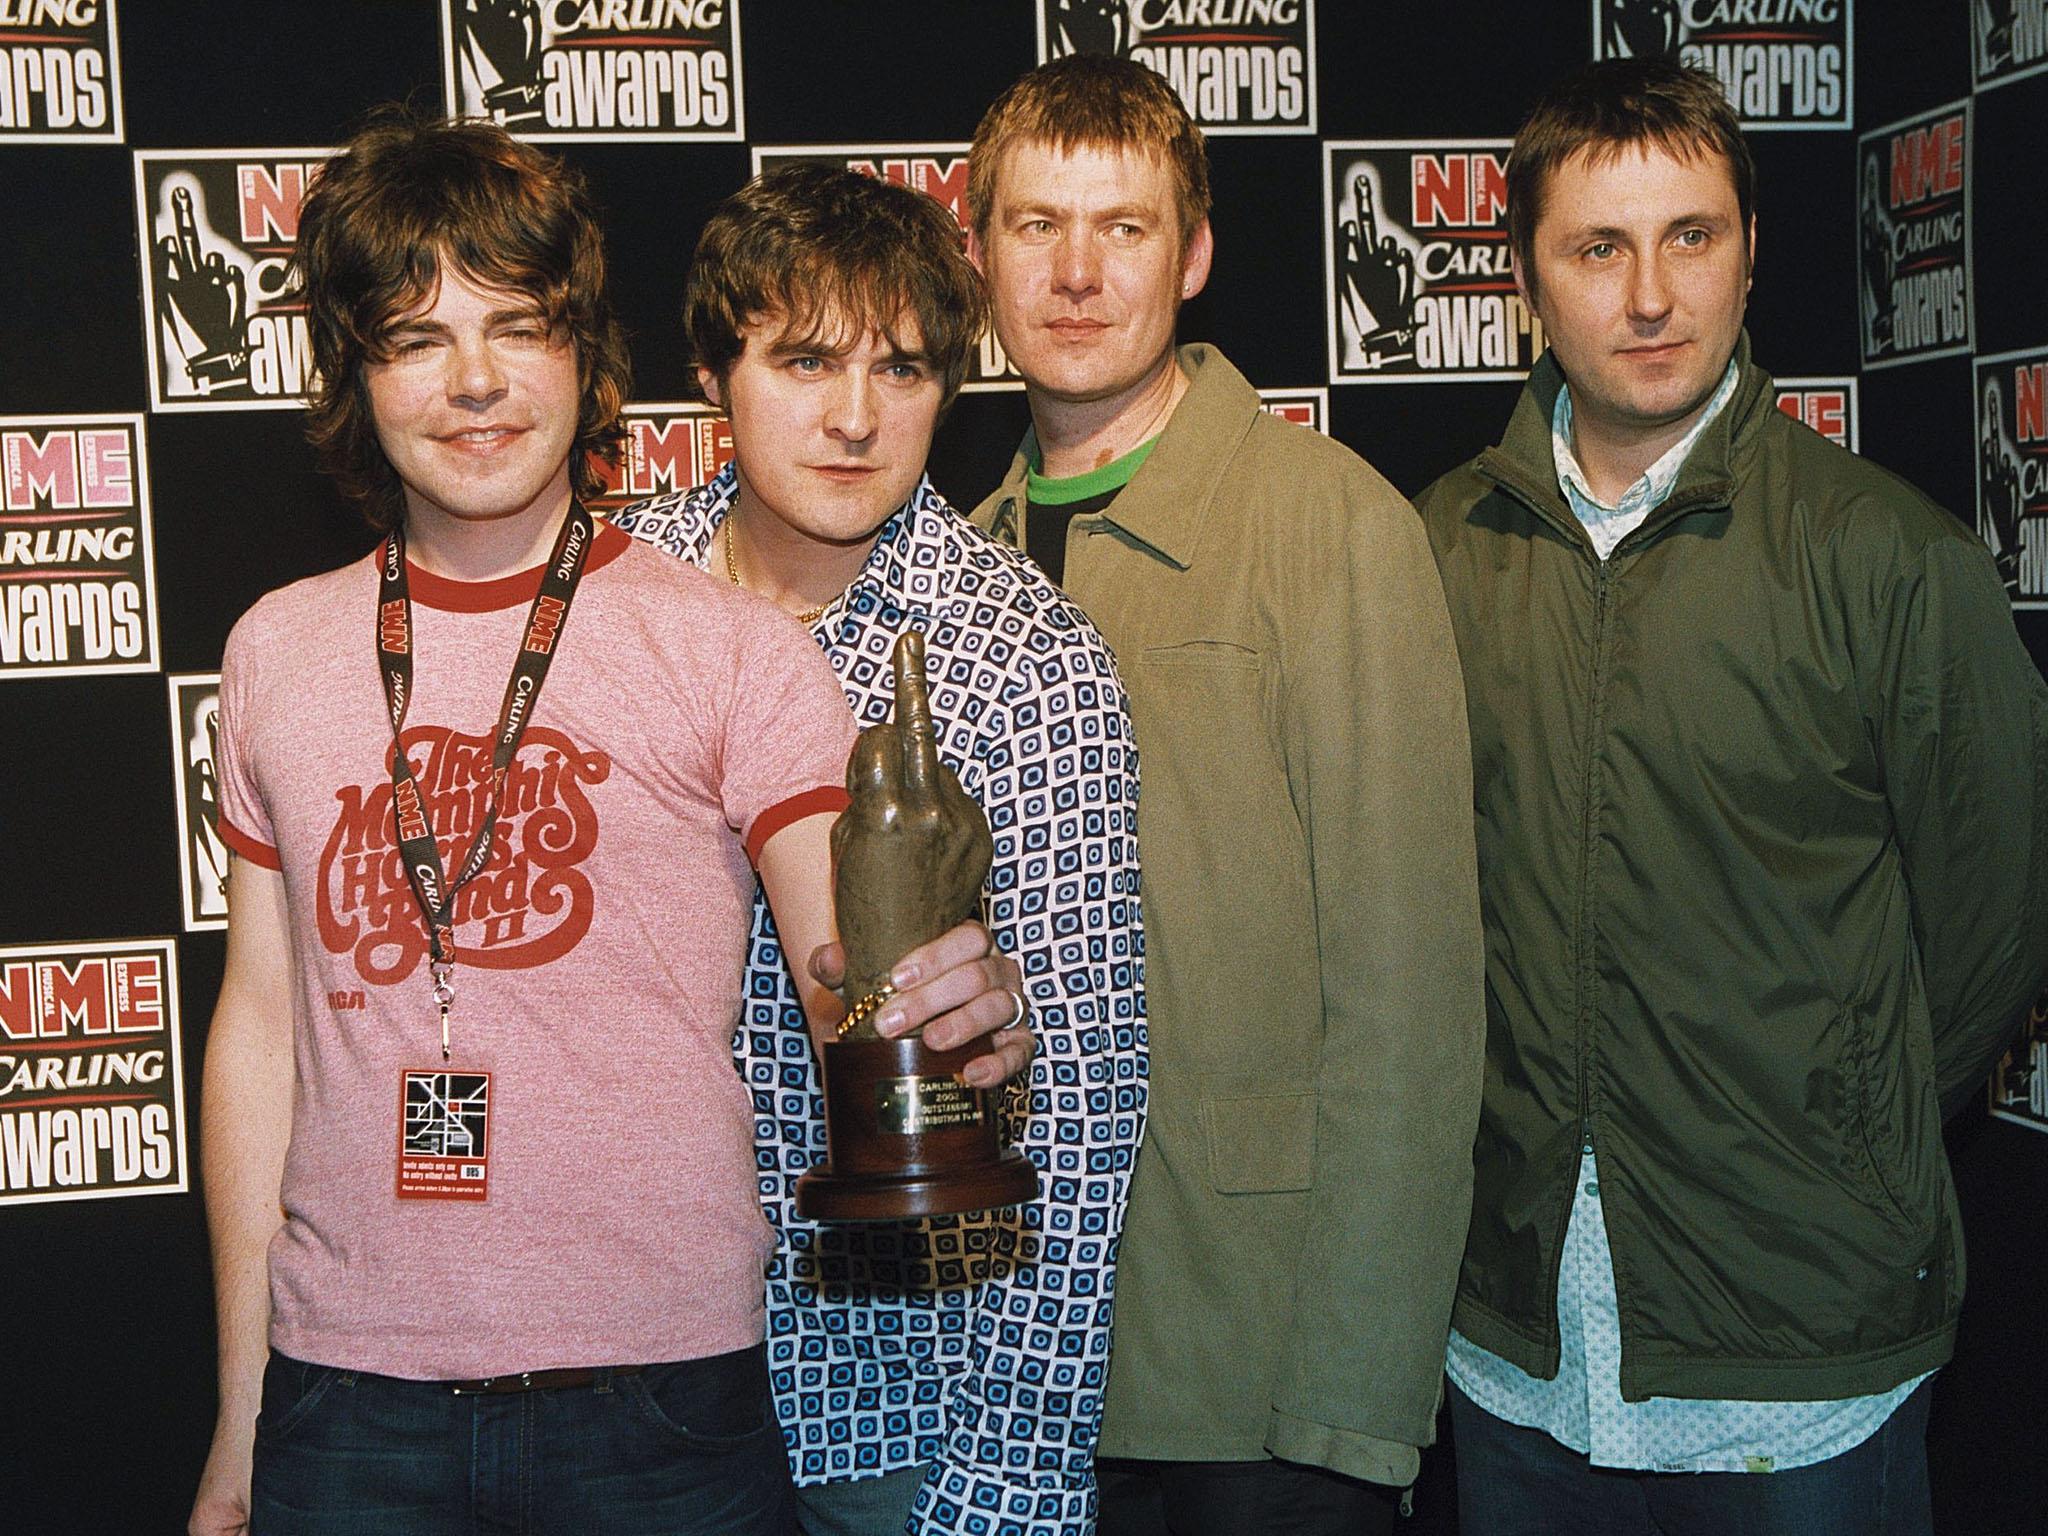 The award-winning Charlatans have put out a 13th studio album